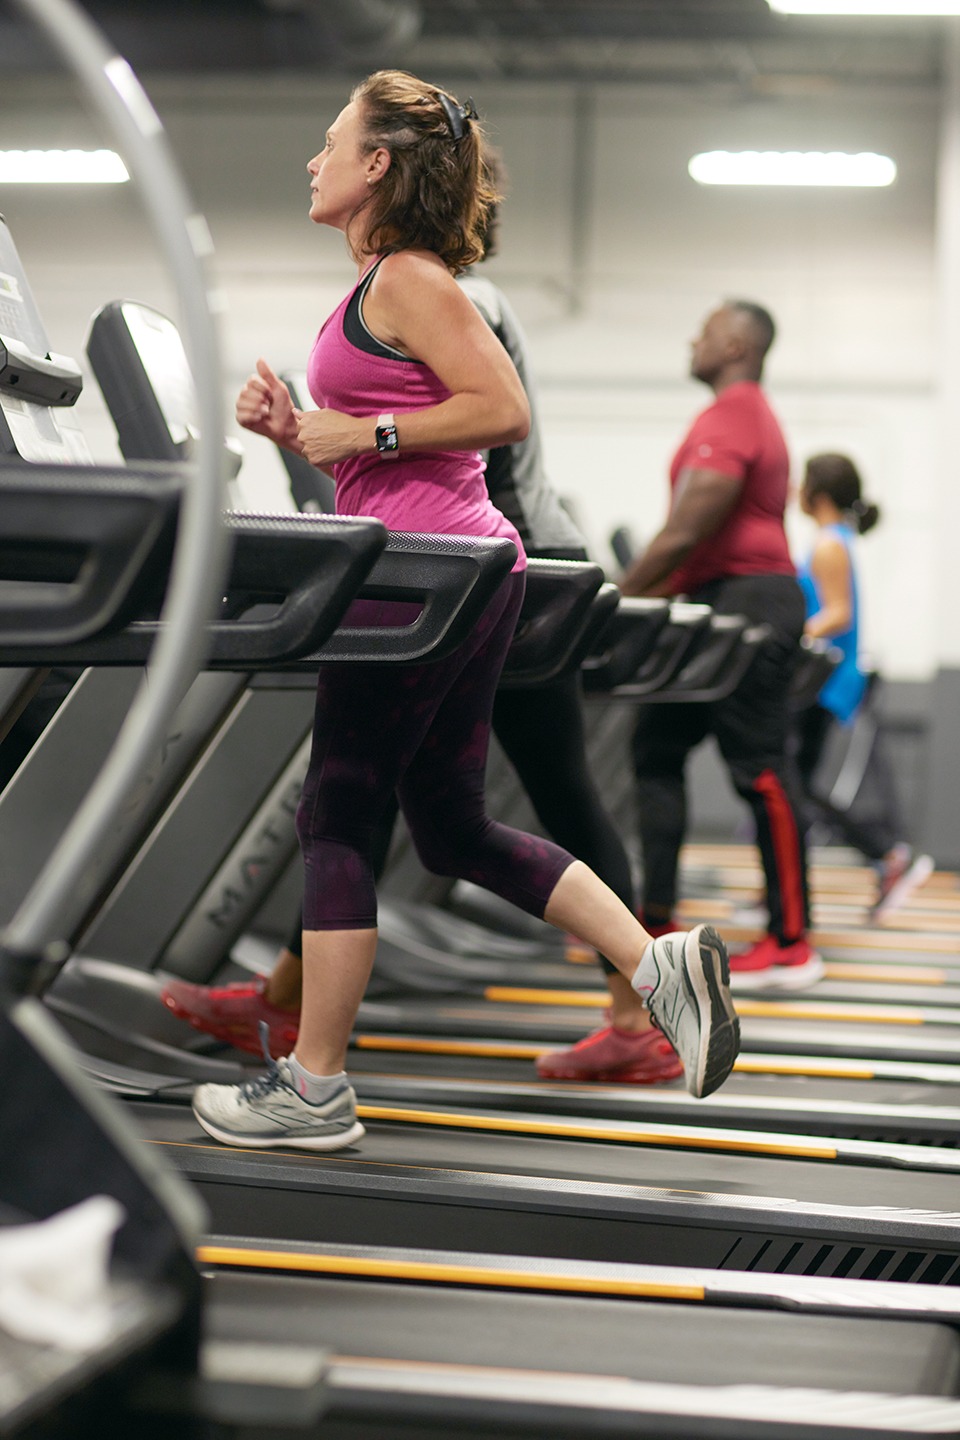 people running on treadmills with a woman in the foreground